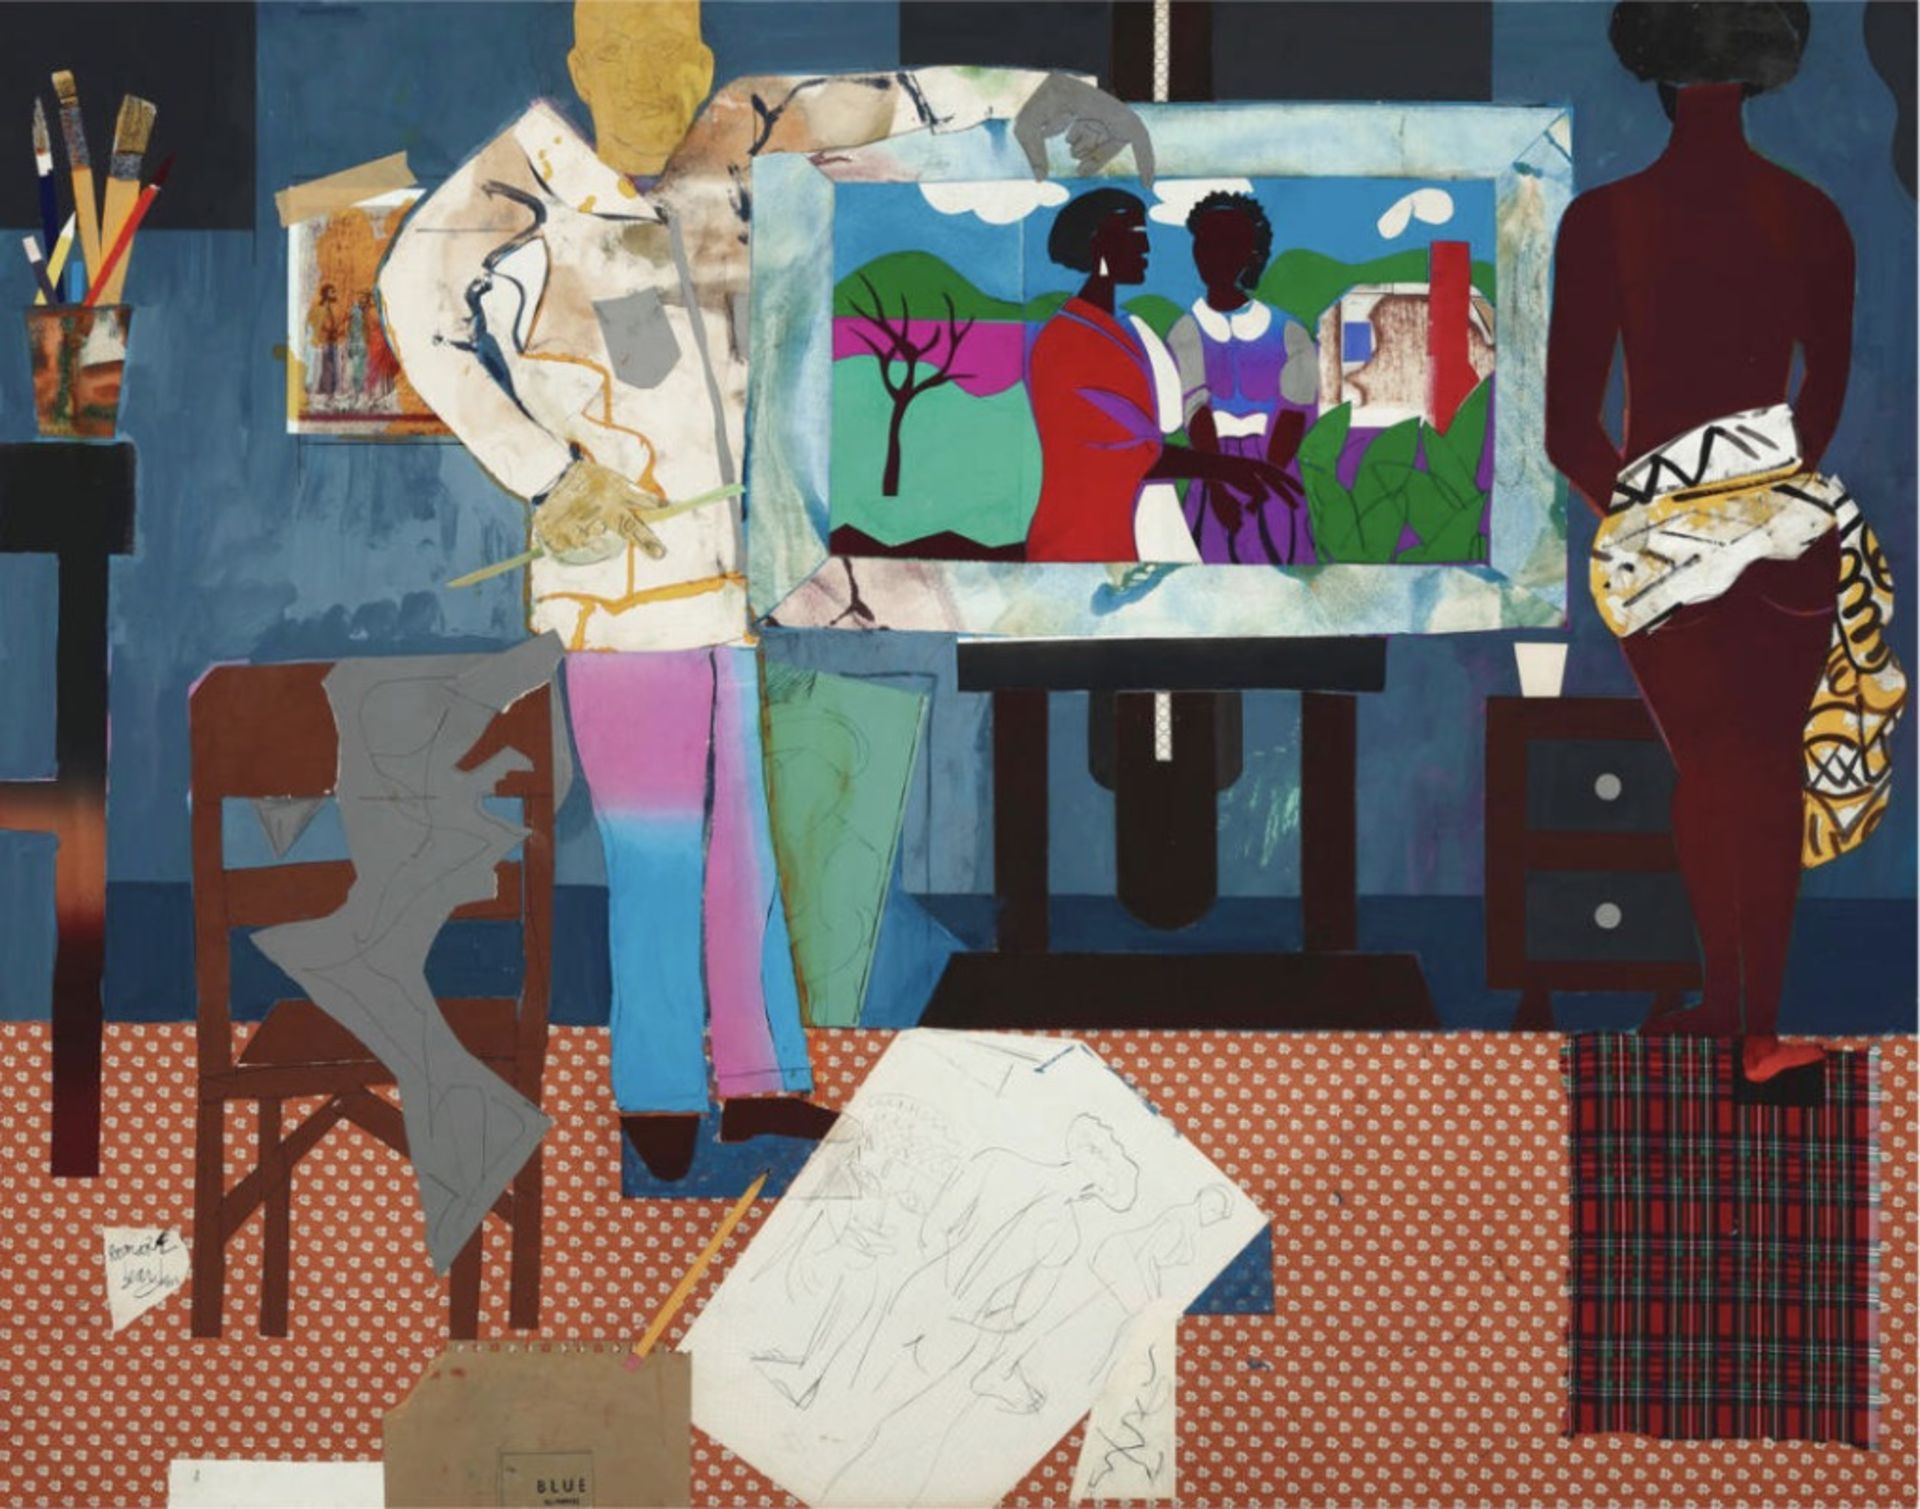 Romare Bearden "Painting and Model, 1981" Print